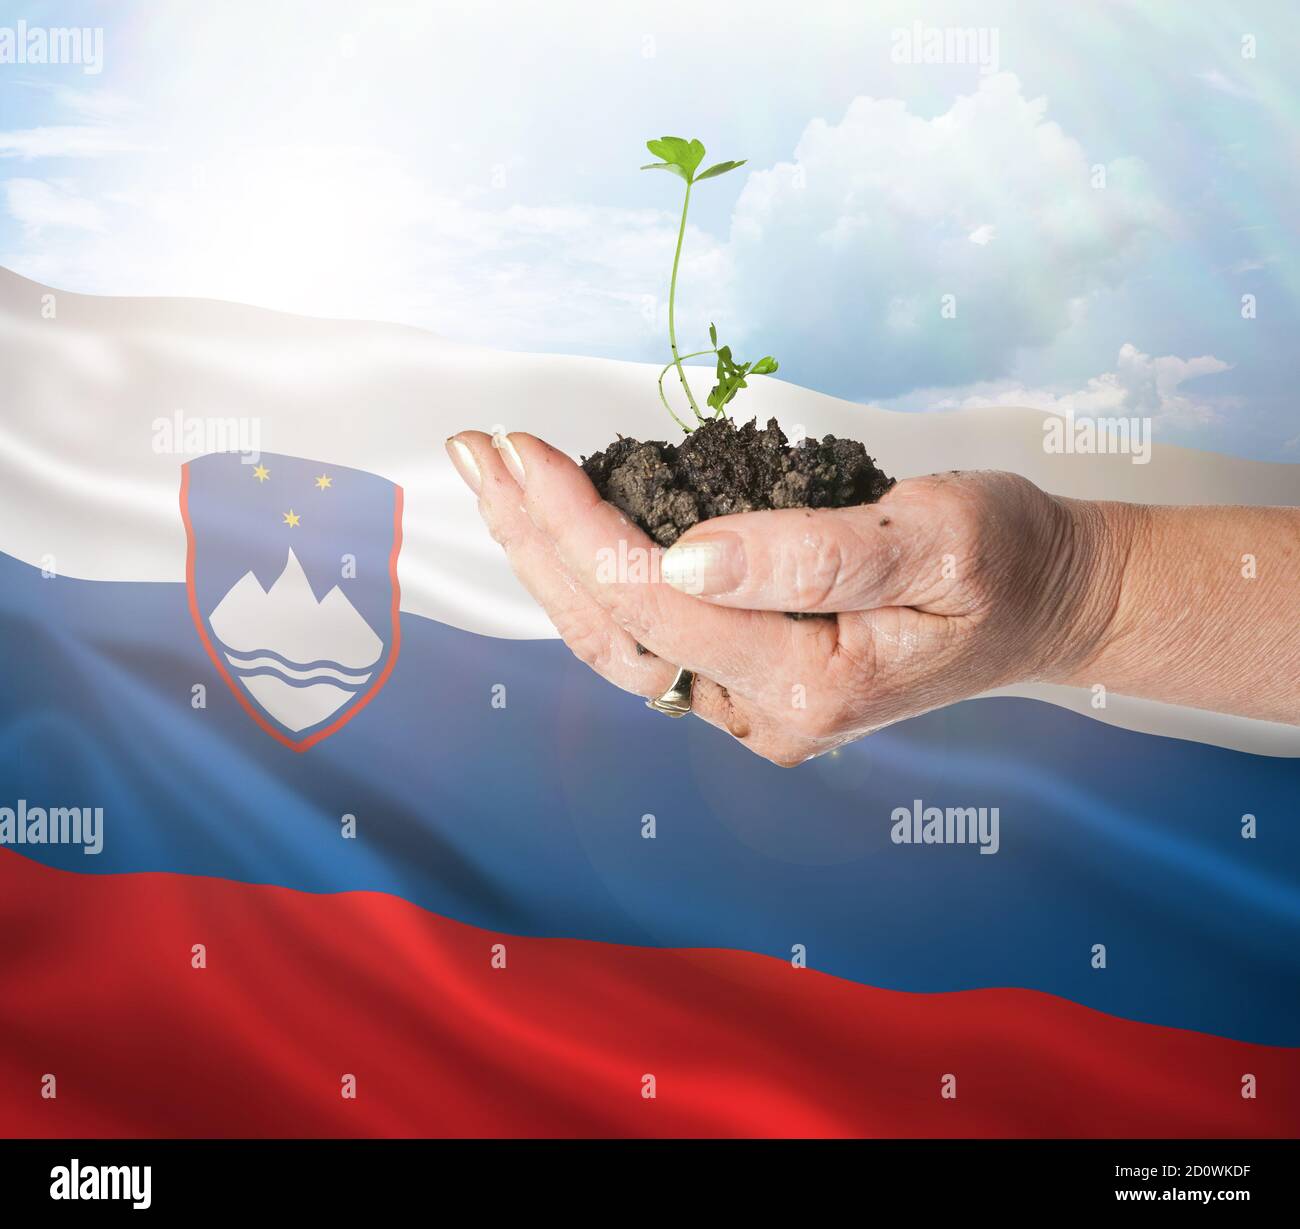 Slovenia growth and new beginning. Green renewable energy and ecology concept. Hand holding young plant. Stock Photo